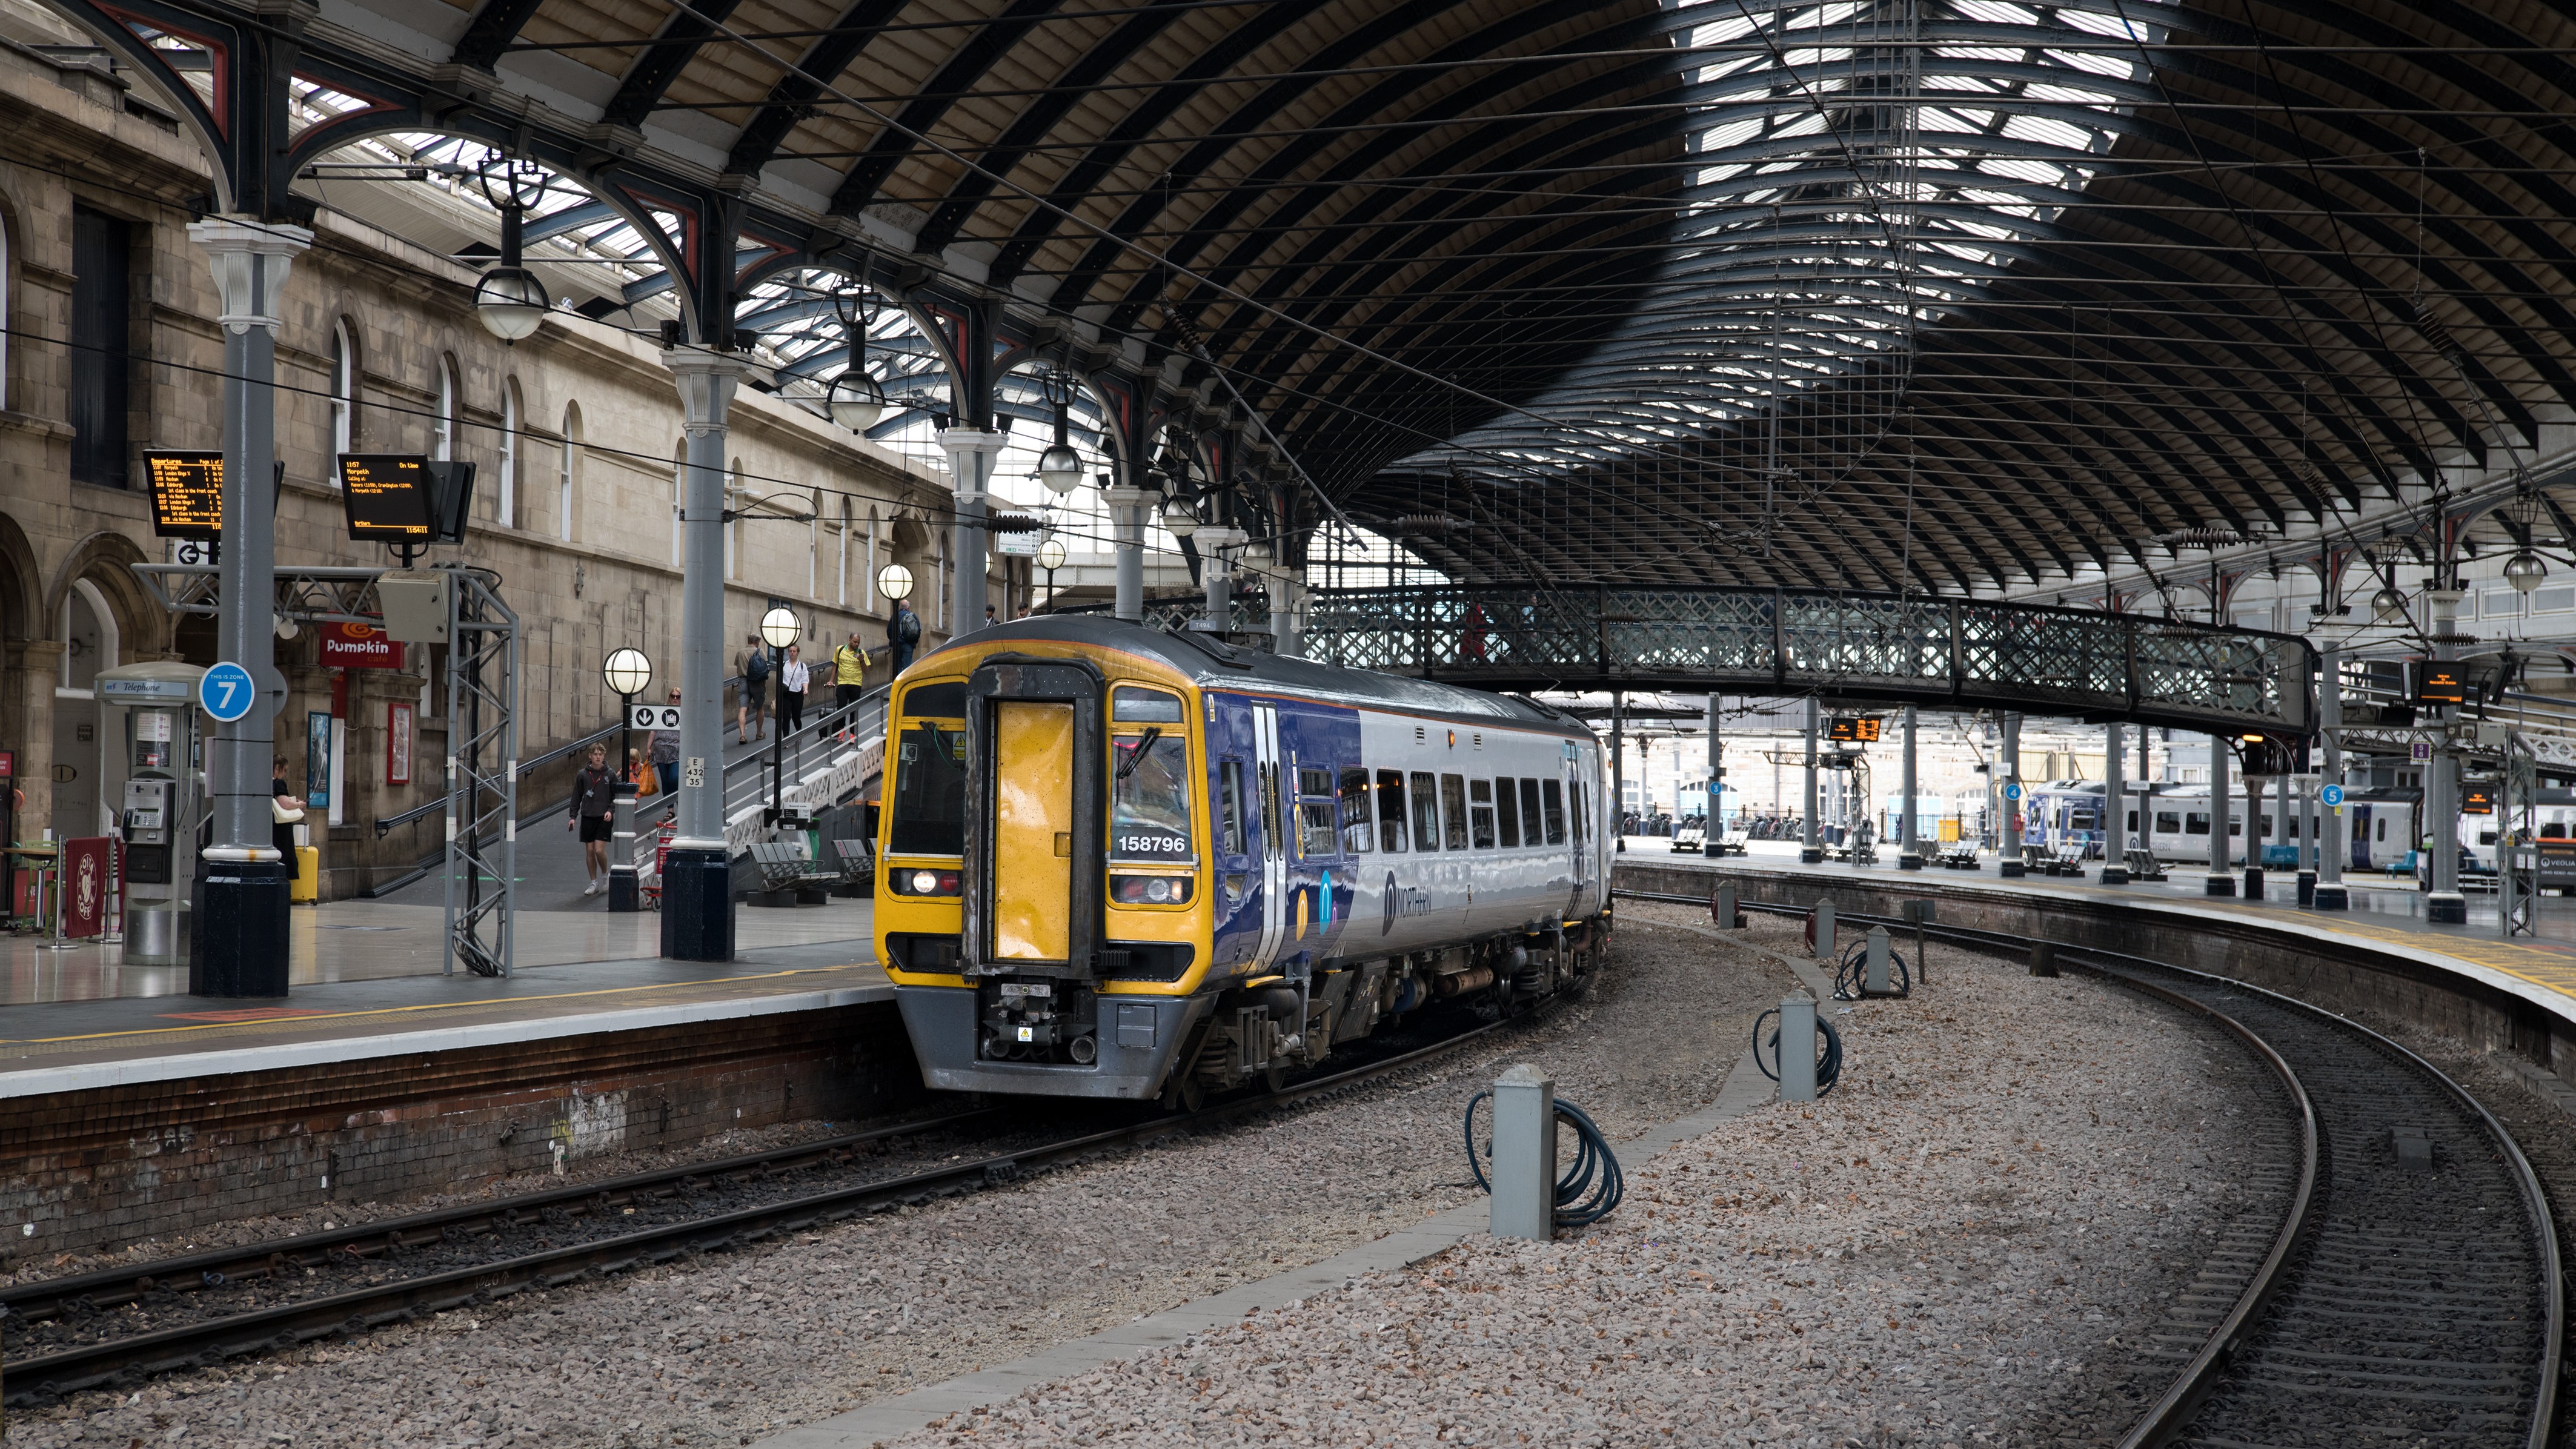 A train arrives at Newcastle Station